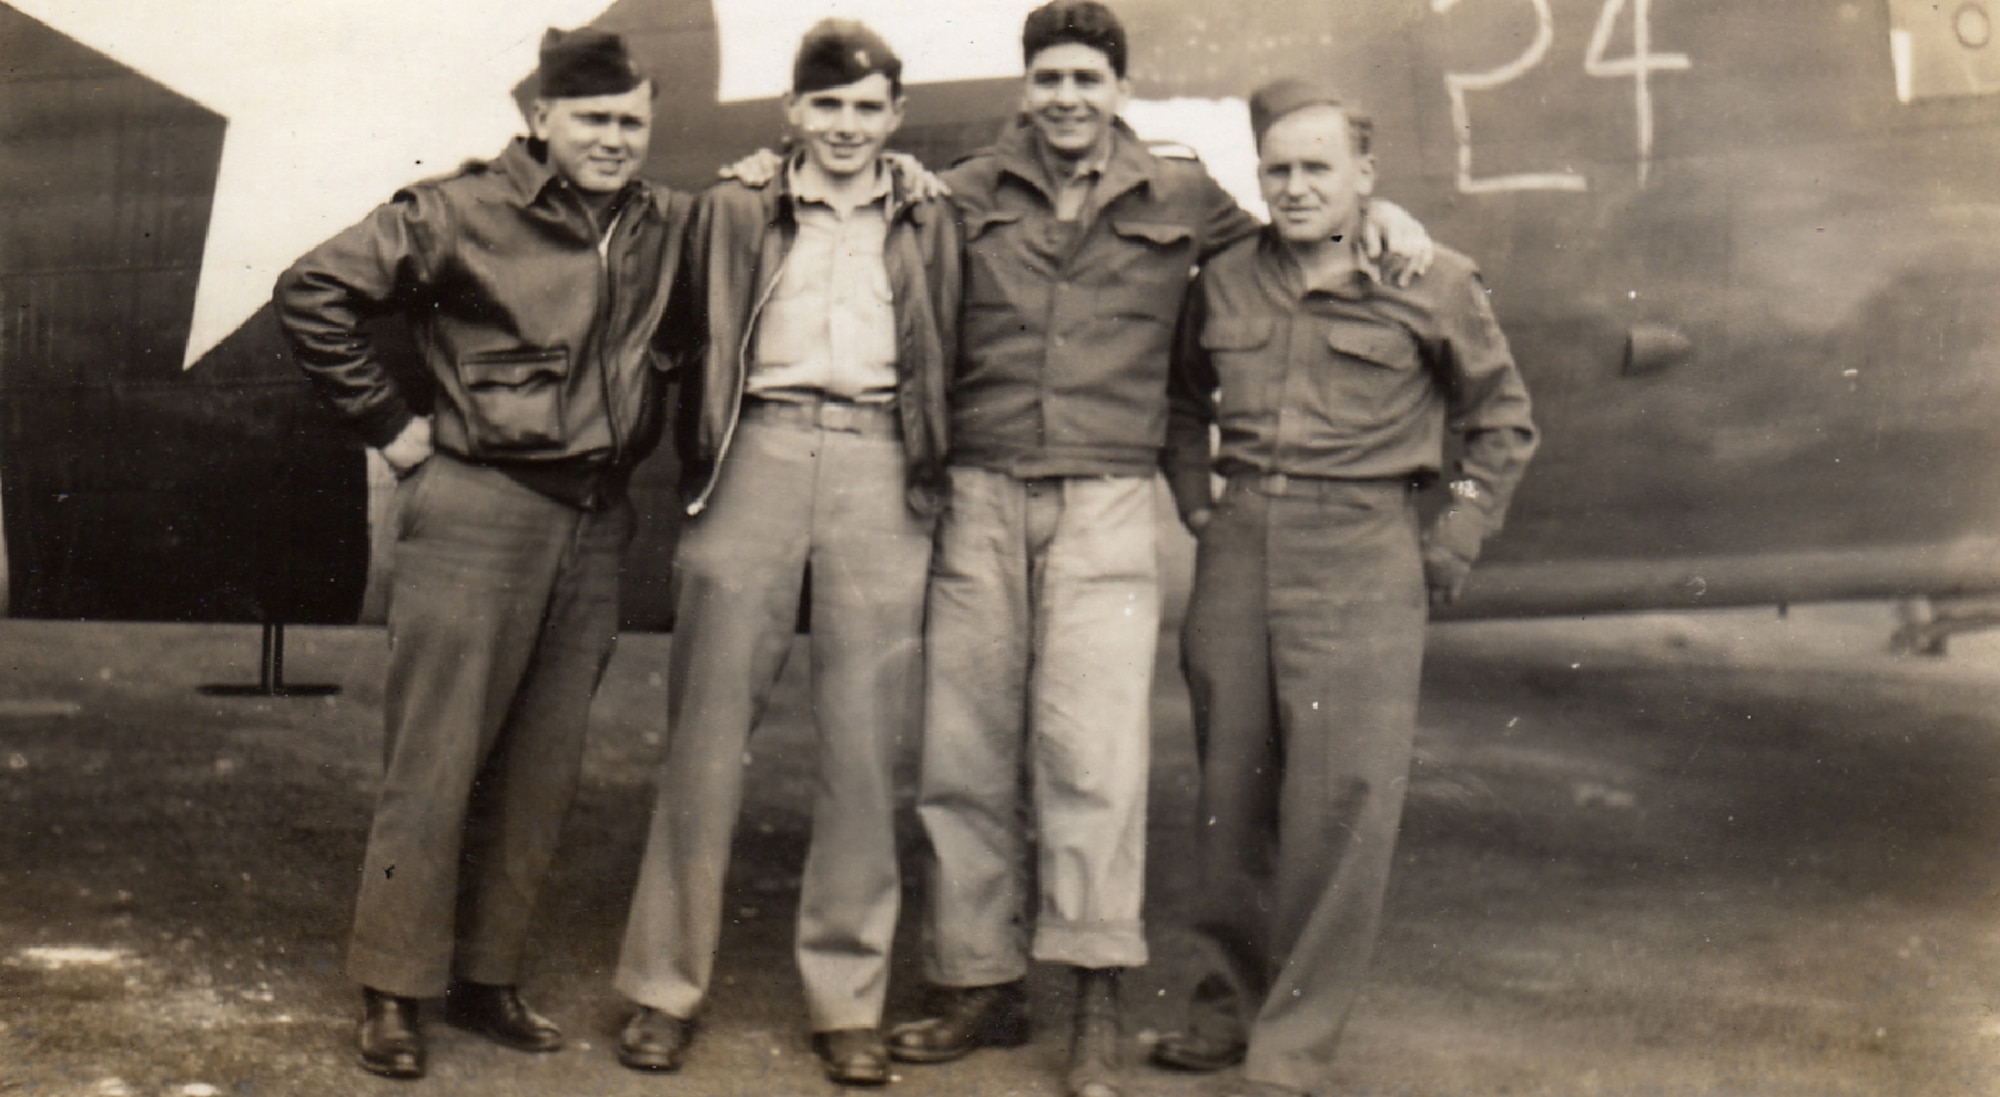 Crew of the Hurlburt C-47, tail number 43-15510,on Sept. 17, 1944, before the first mission of Operation Market Garden: Lt. John Harmonay, Lt. Bill Prindible, Staff Sgt. Mike Ingrisano and Tech. Sgt. Jules Zinkiewicz. (Courtesy photo)
